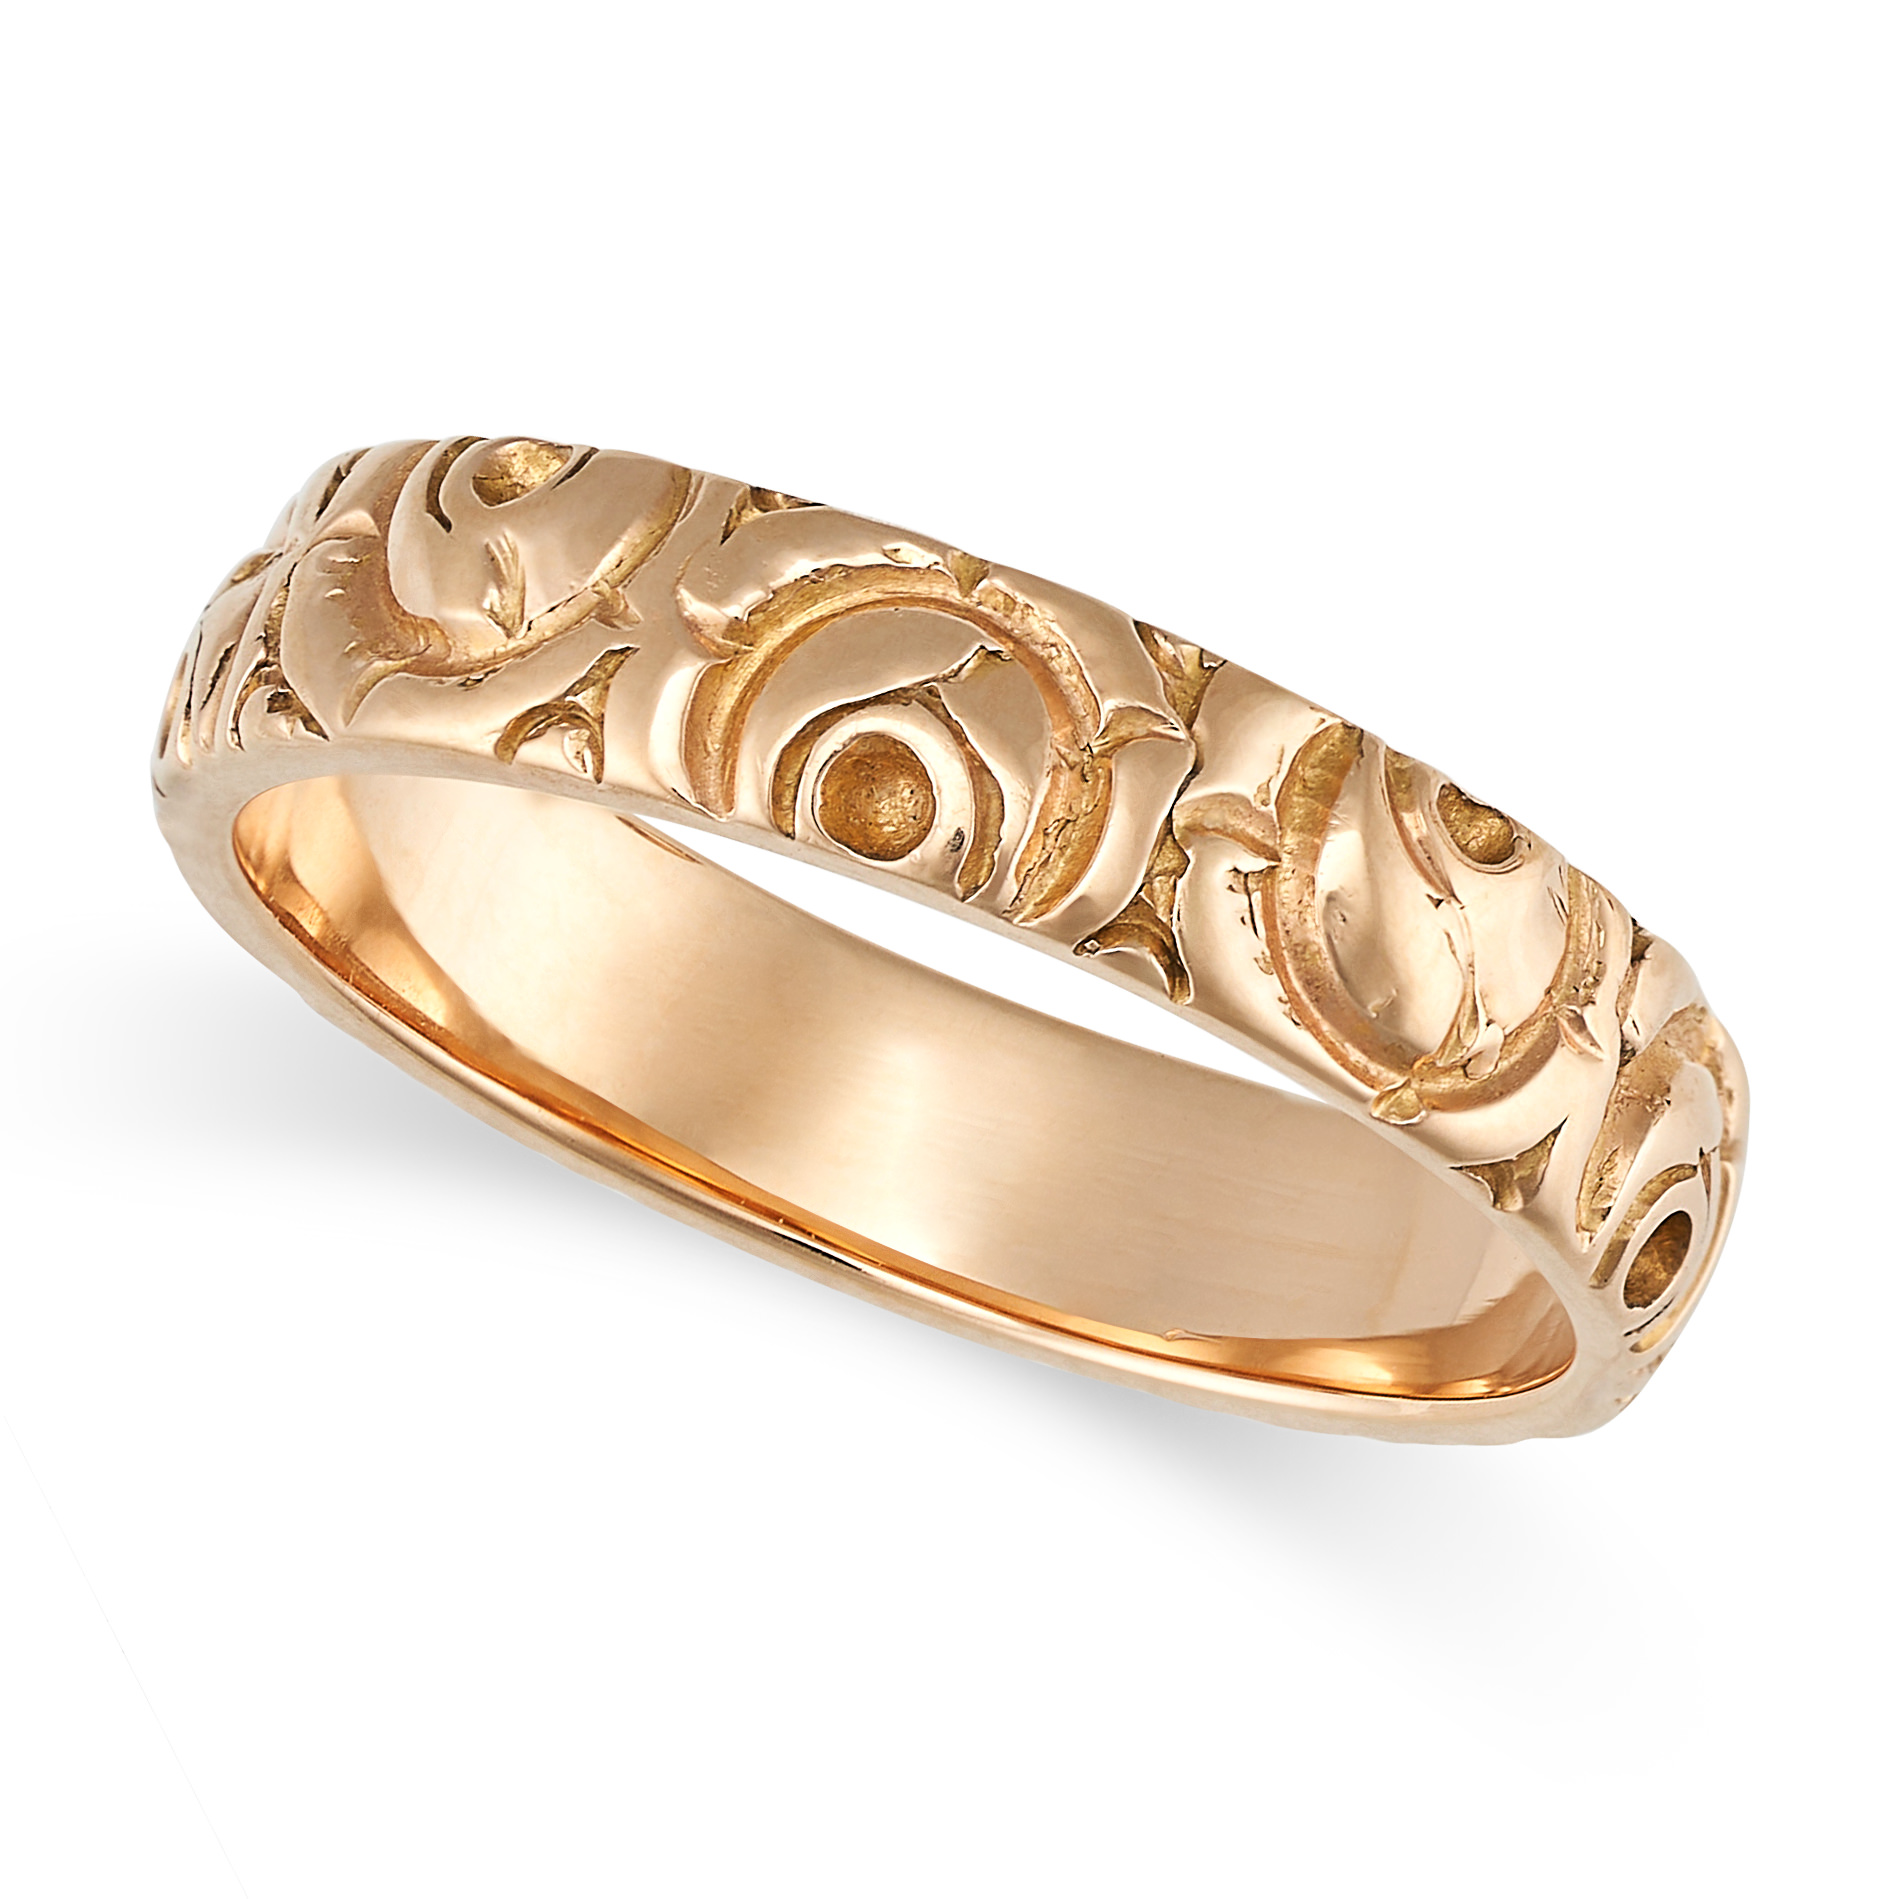 A GOLD BAND RING in yellow gold, with an engraved foliate design, no assay marks, size M / 6.26, ... - Image 2 of 2